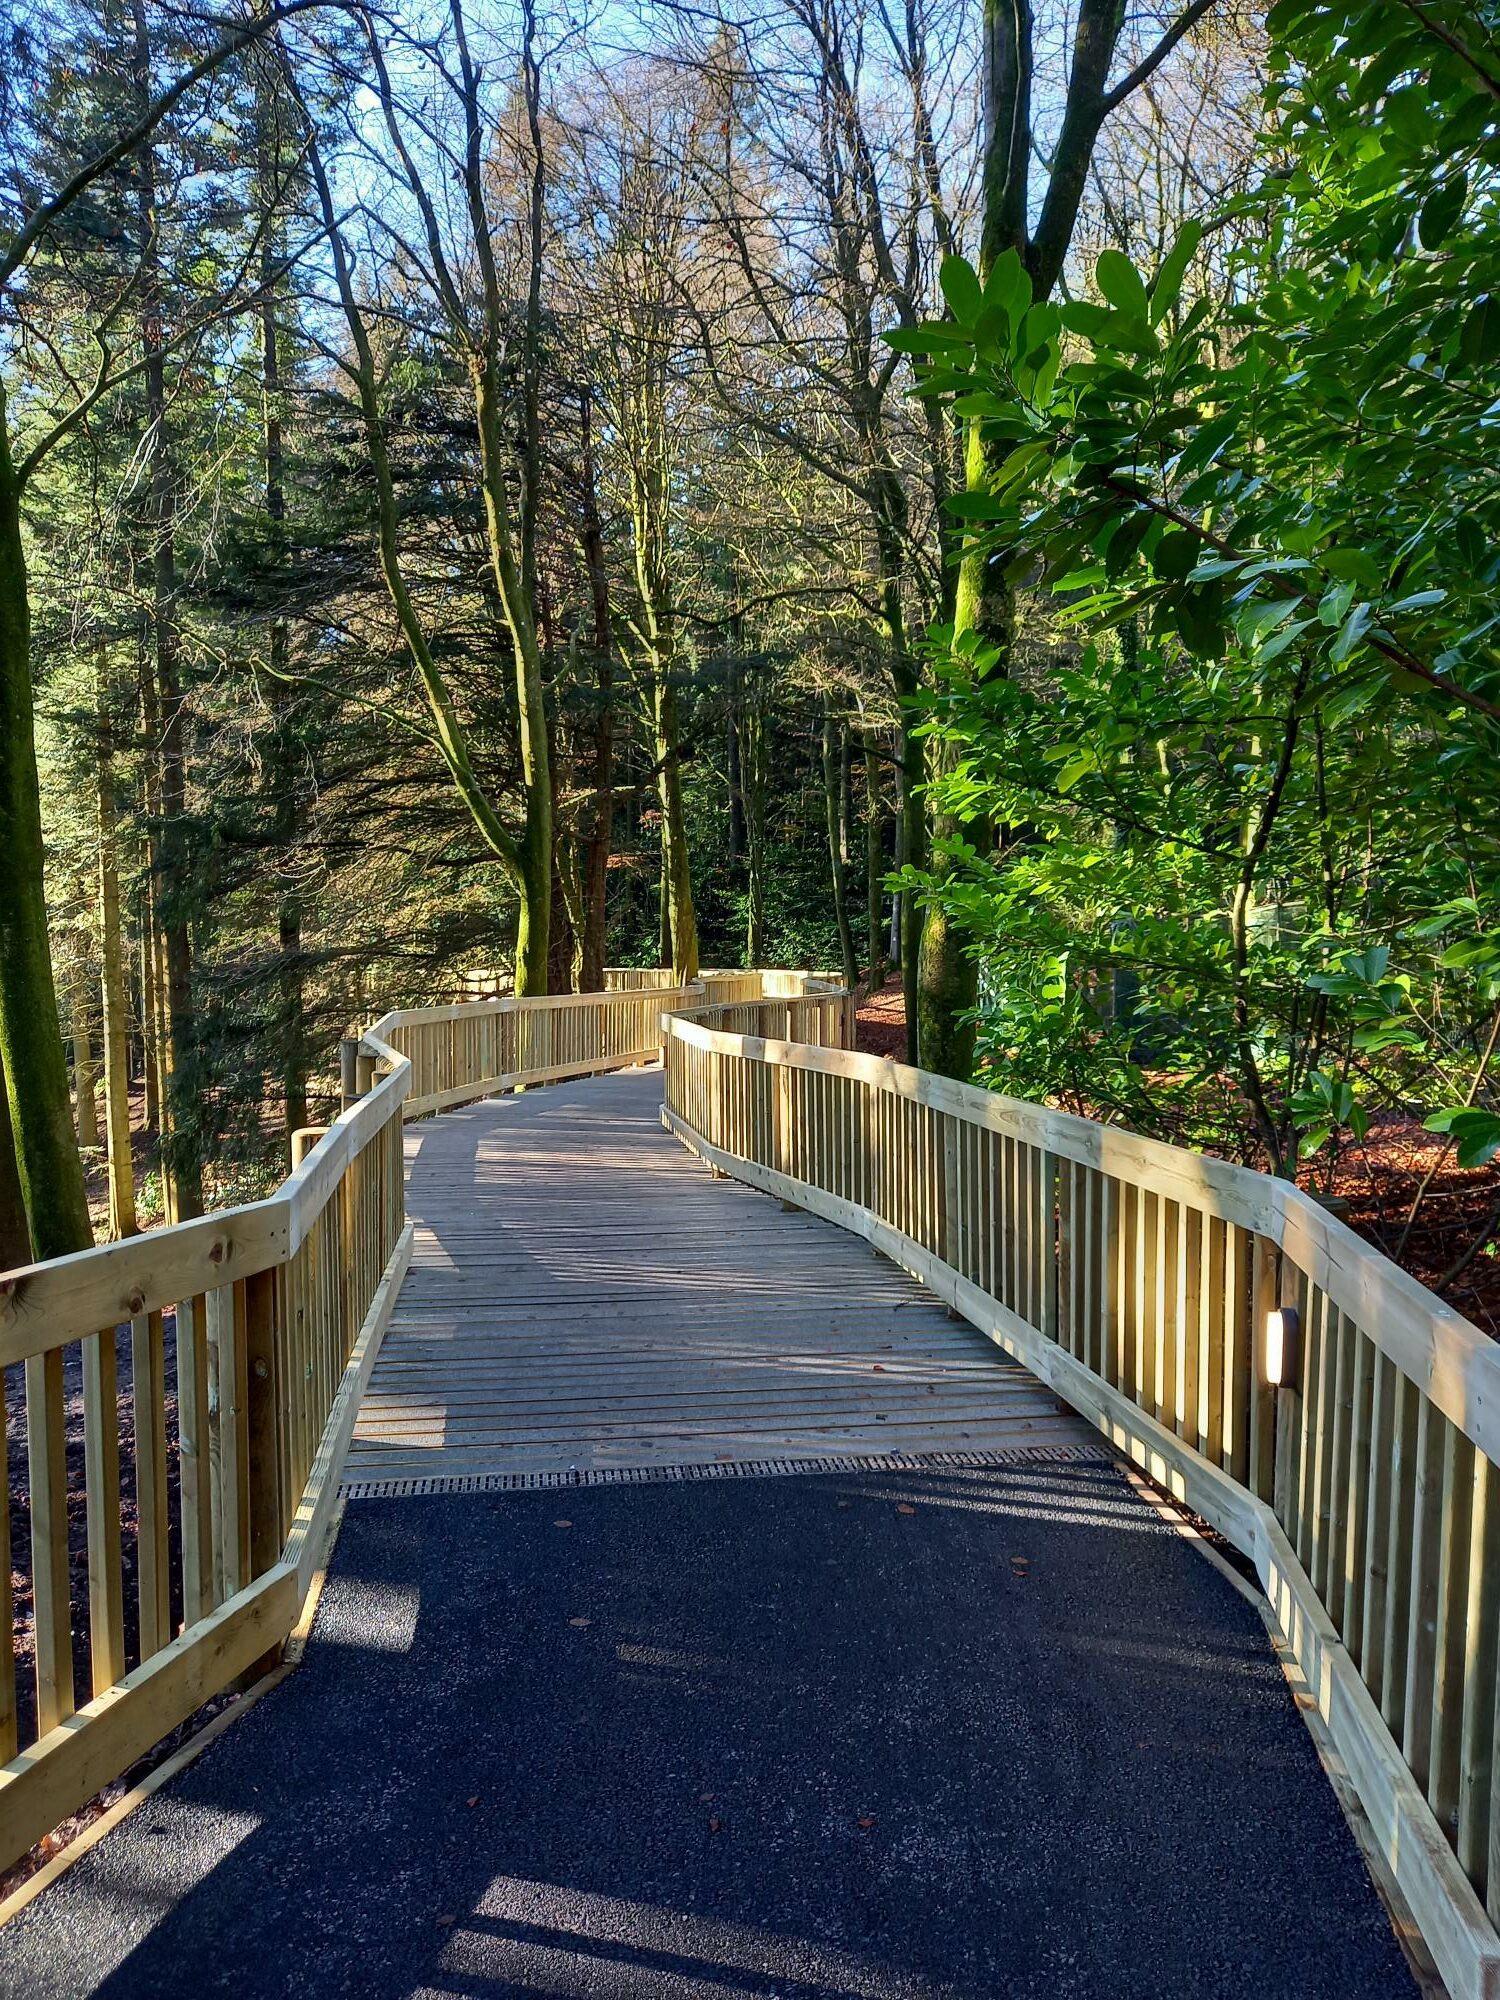 Non-slip timber decking boardwalk at Center Parcs Longleat Forest